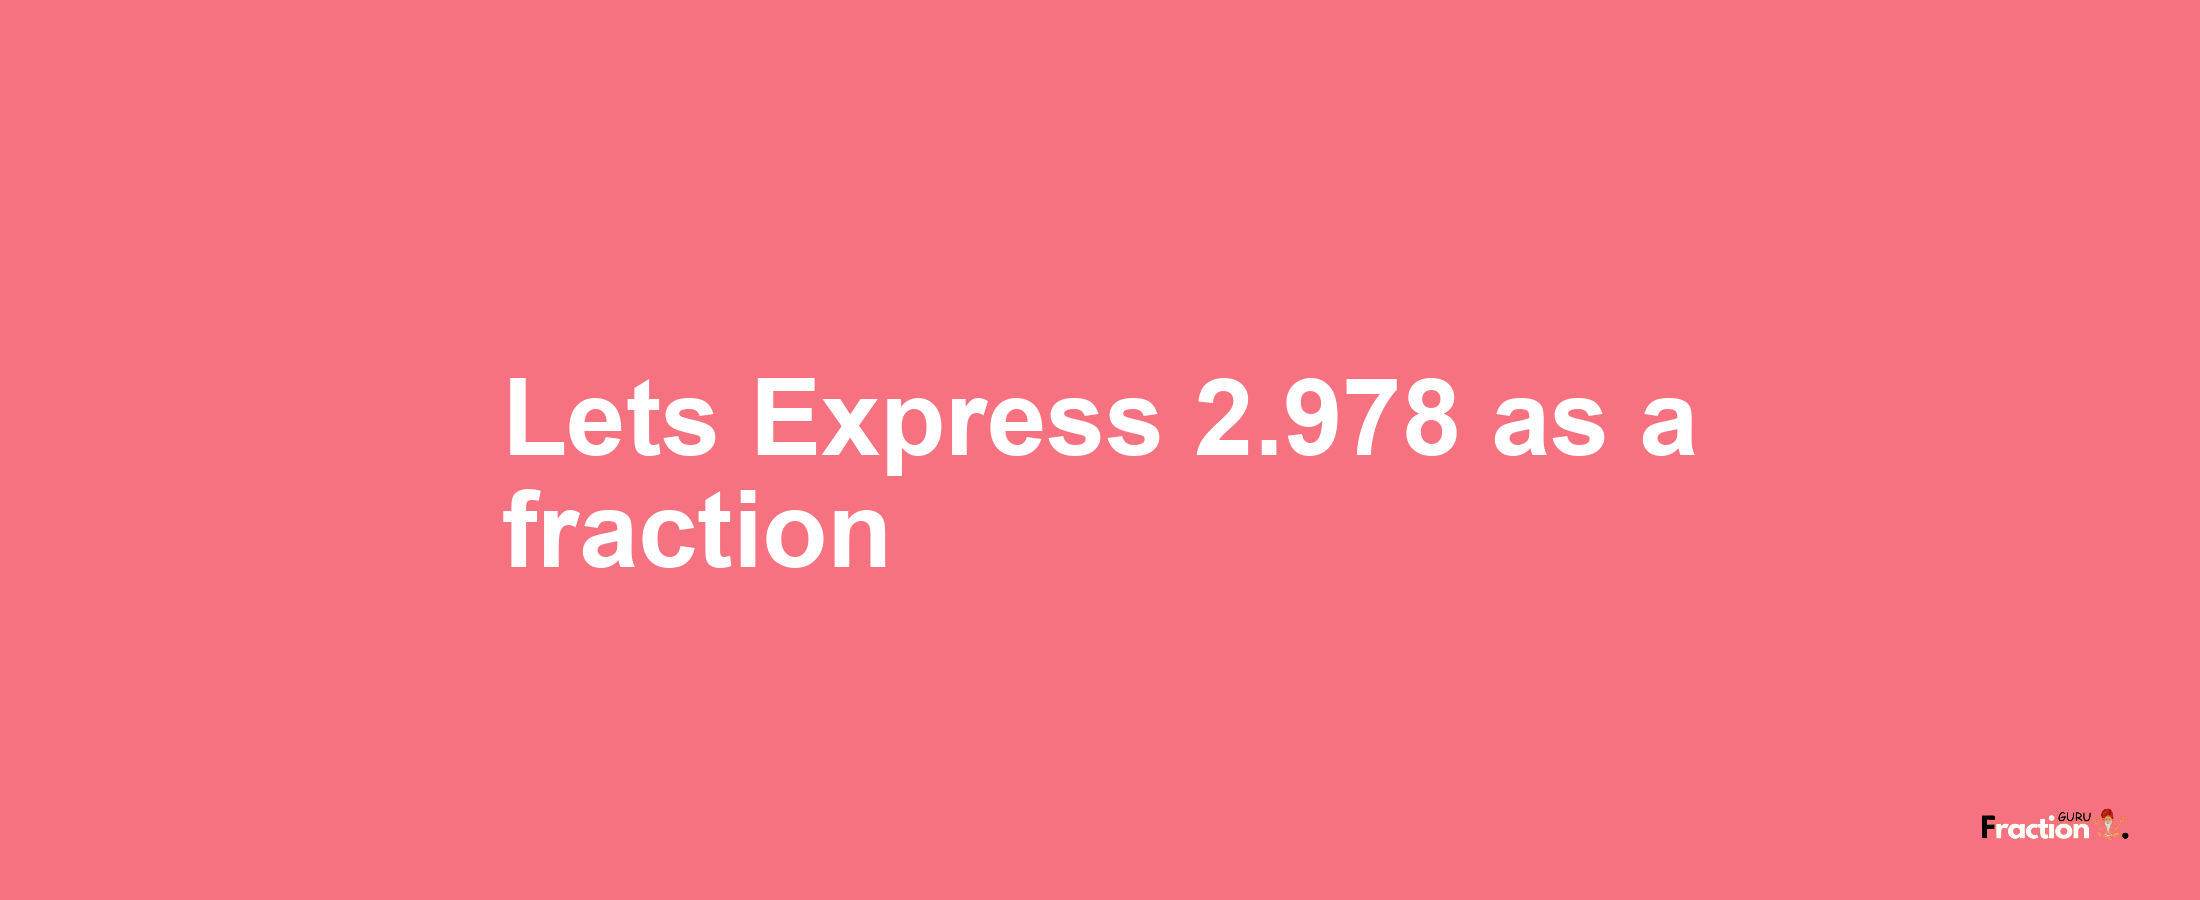 Lets Express 2.978 as afraction